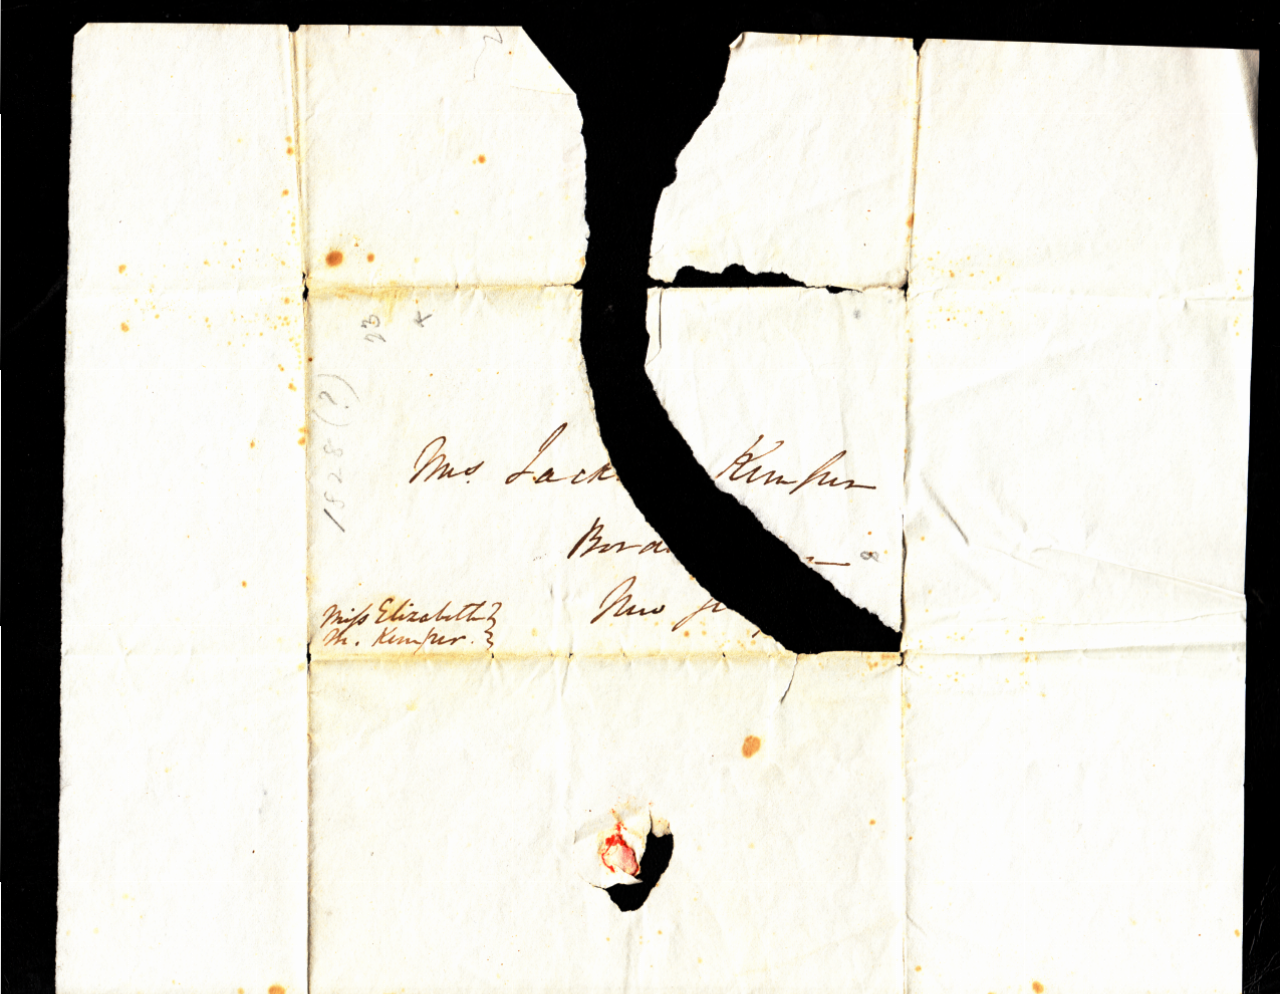 Photo of a decaying and torn letter